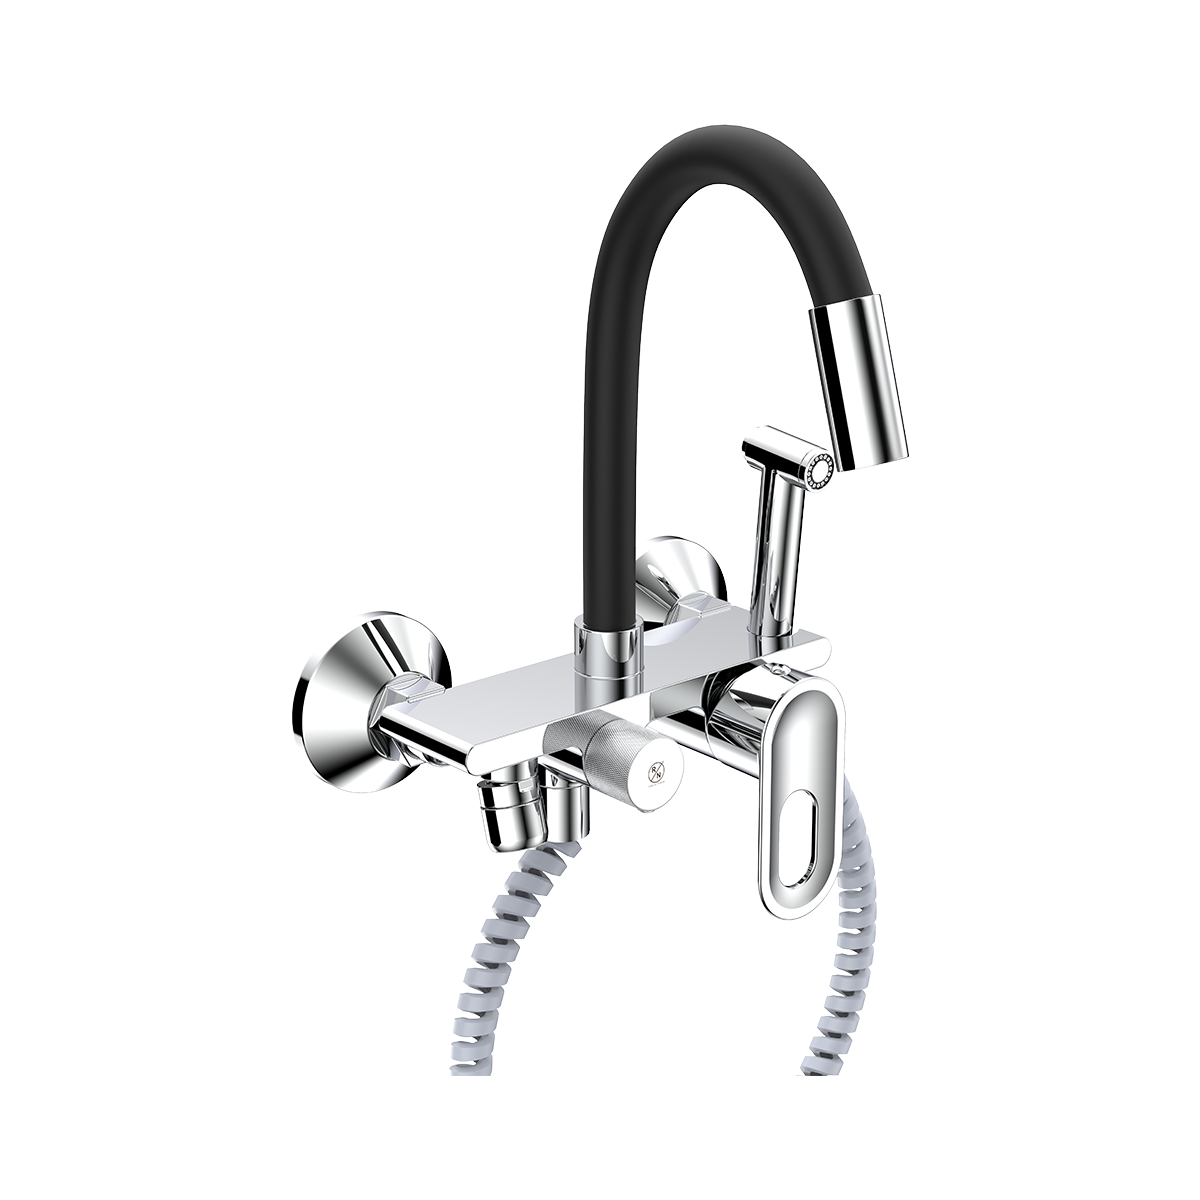 Wall Mounted Sink Mixer With Swivel Flexible Spout & Hand Shower